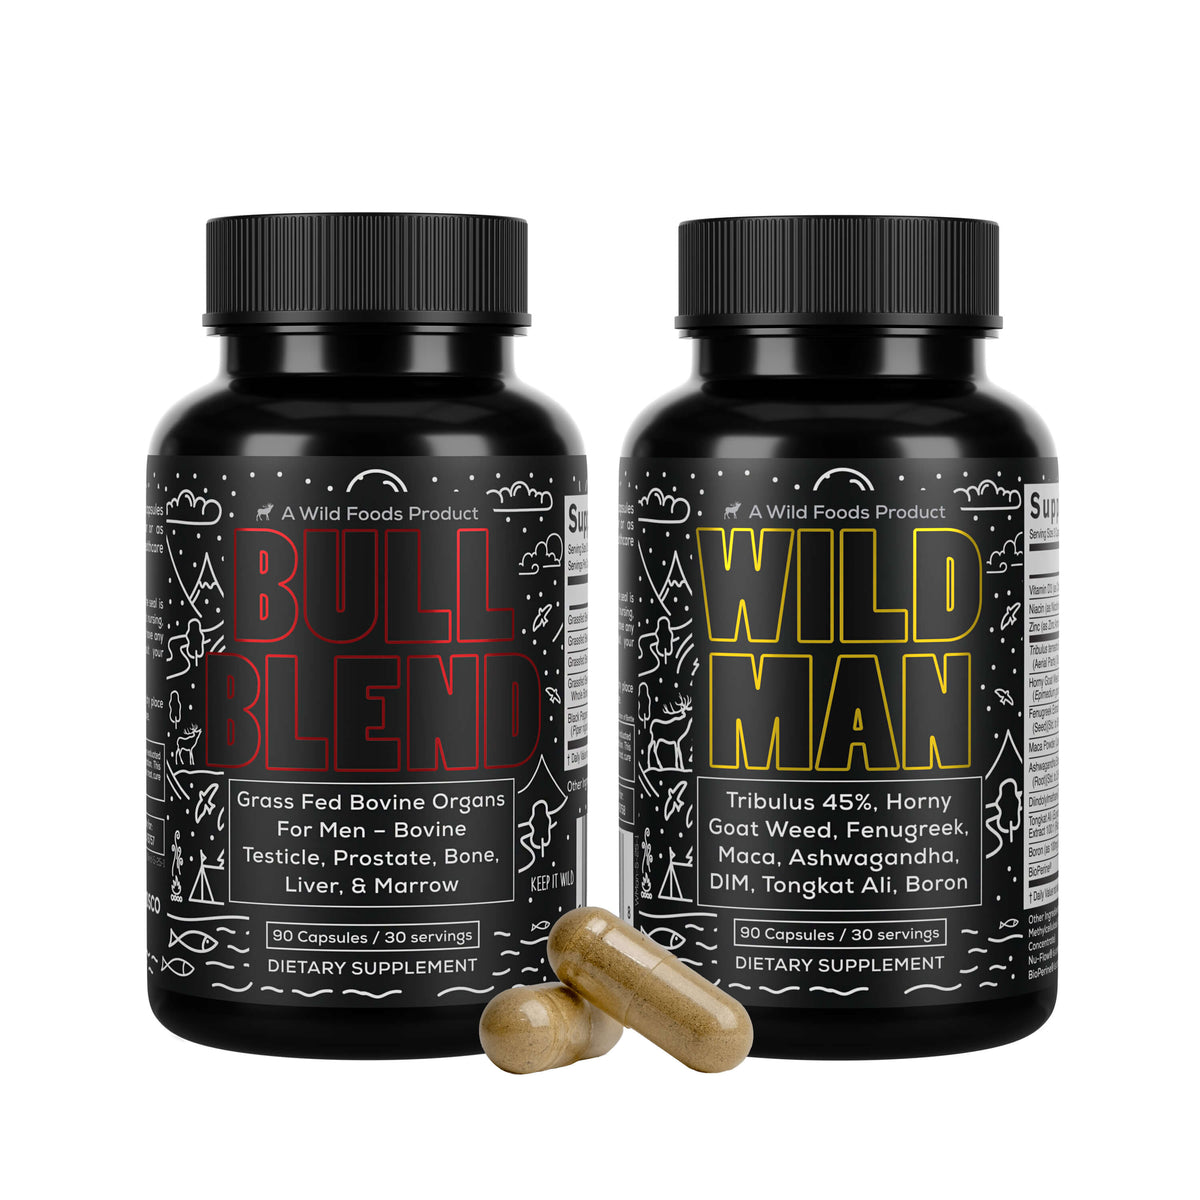 Who wants over 500+ pure bulk supplements with no fillers or additives, Regret Buying